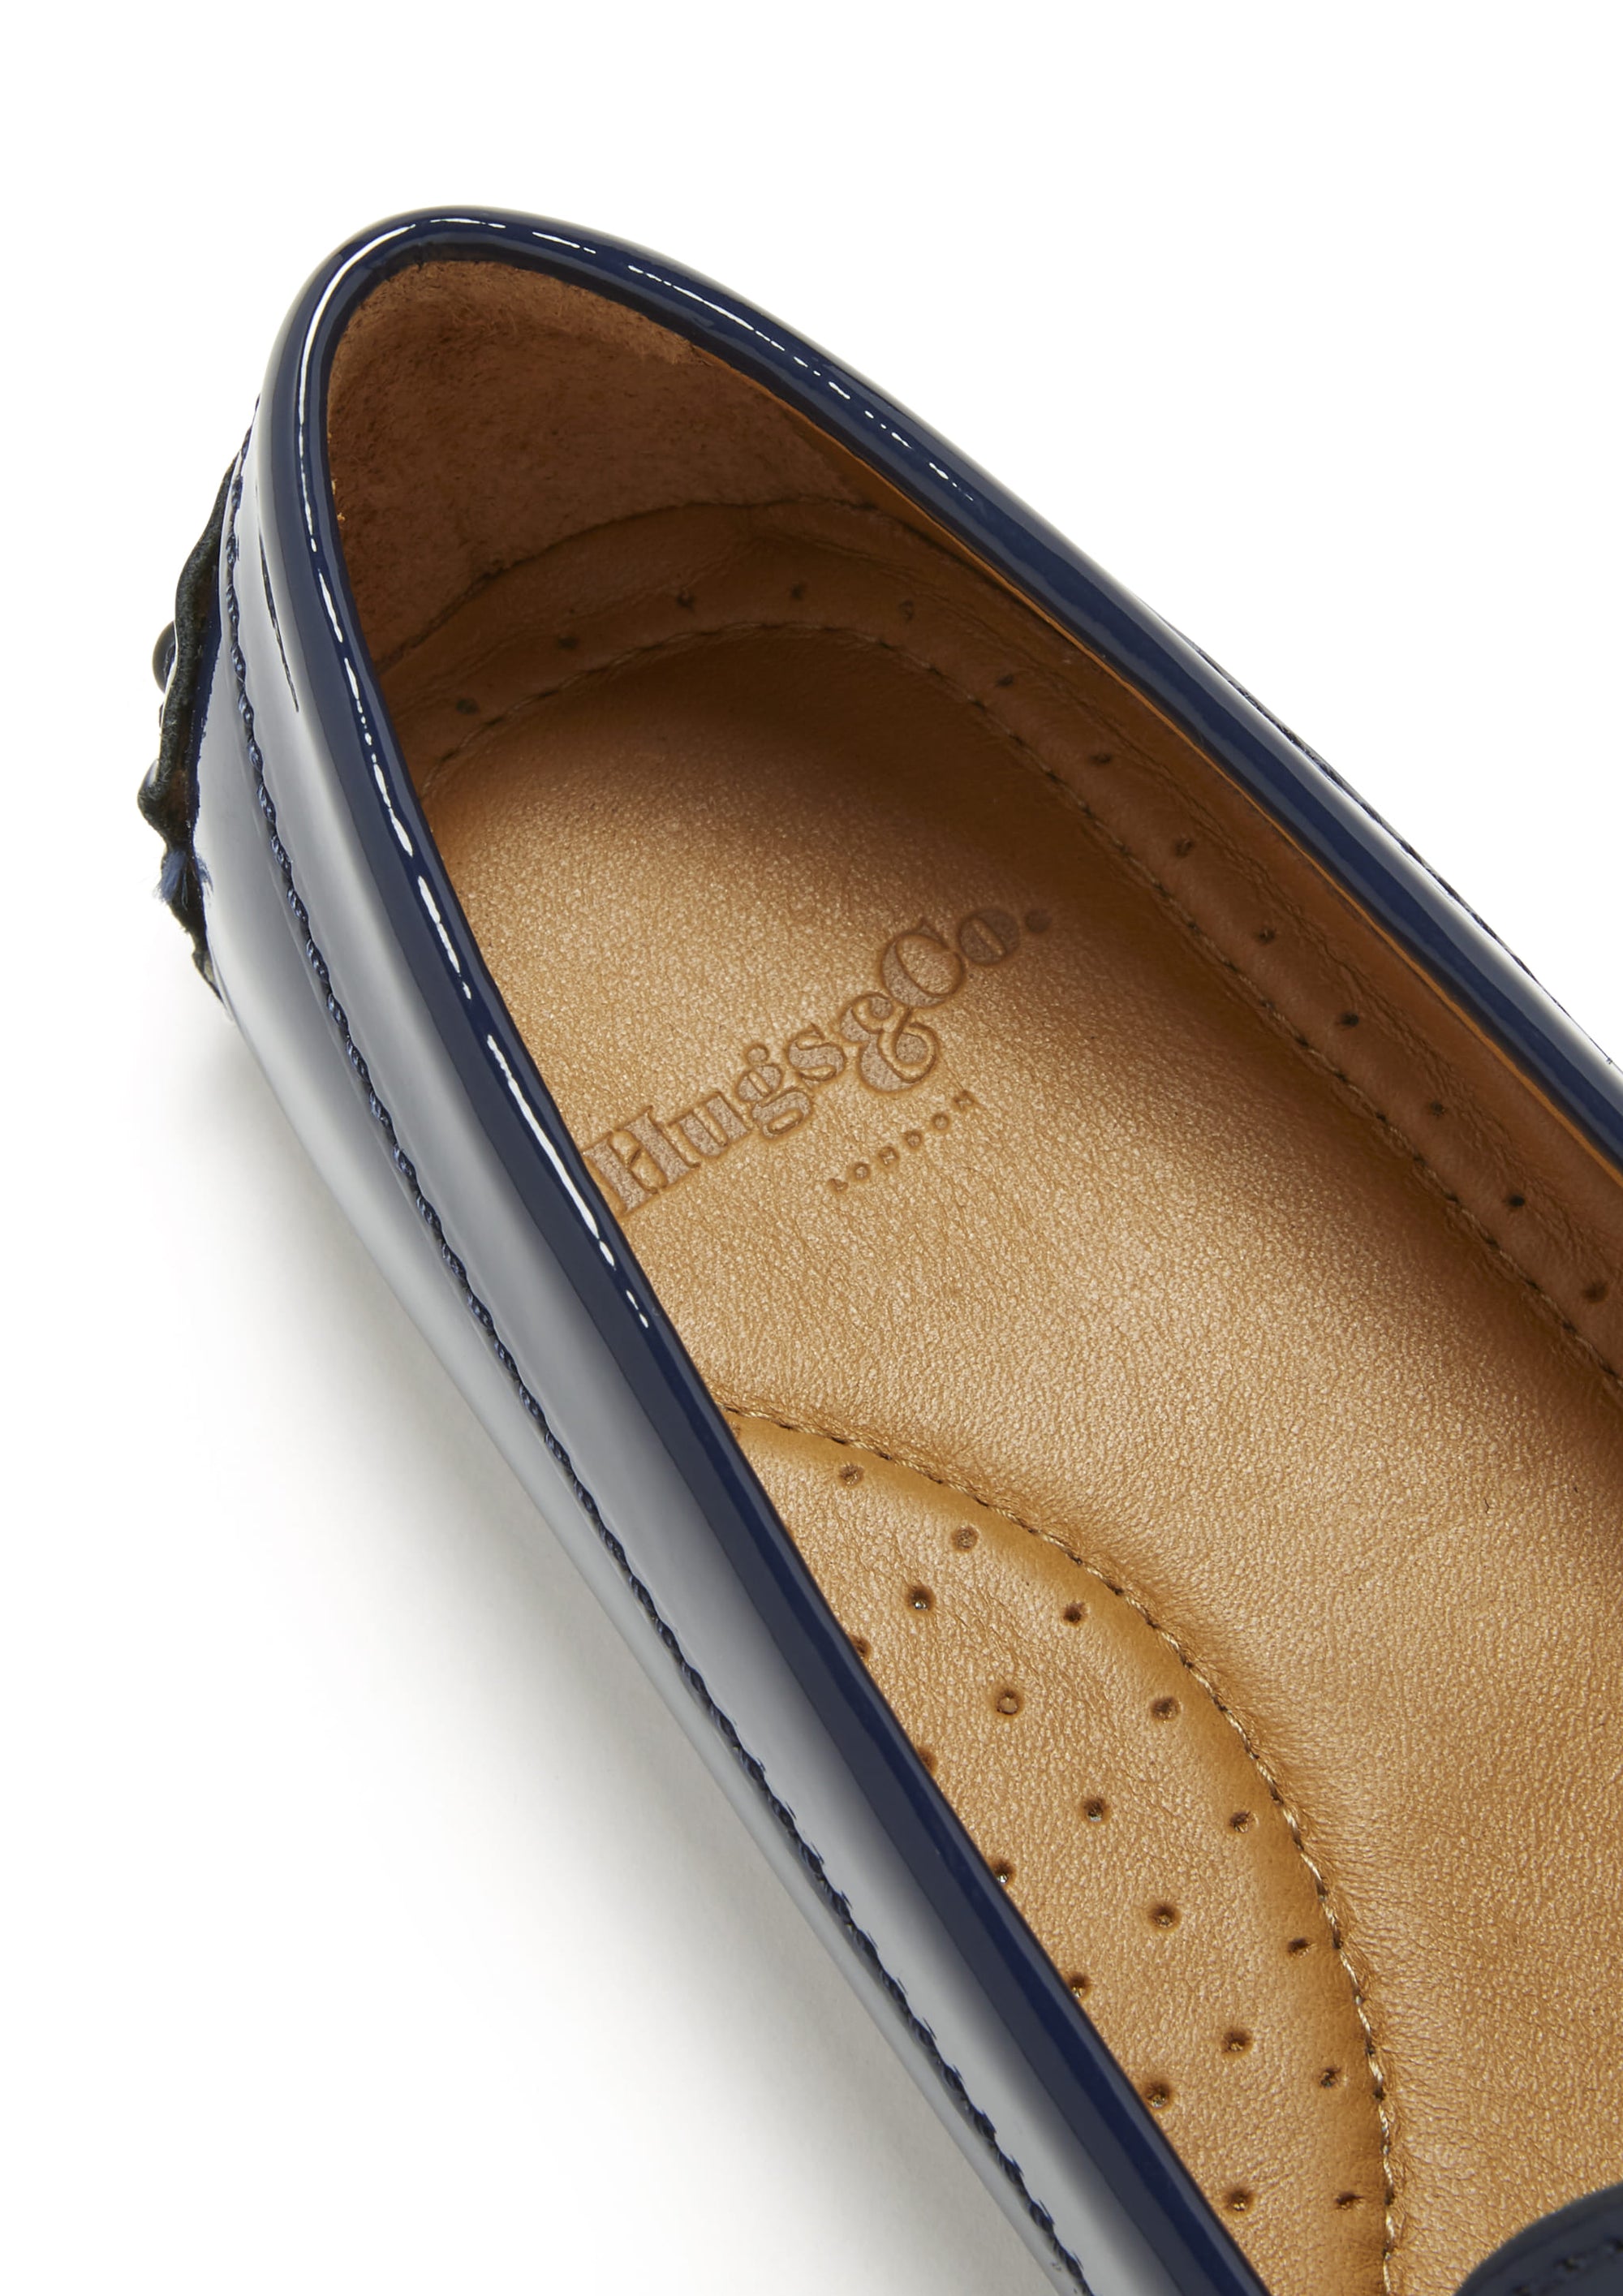 Women's Penny Driving Loafers, navy blue patent leather